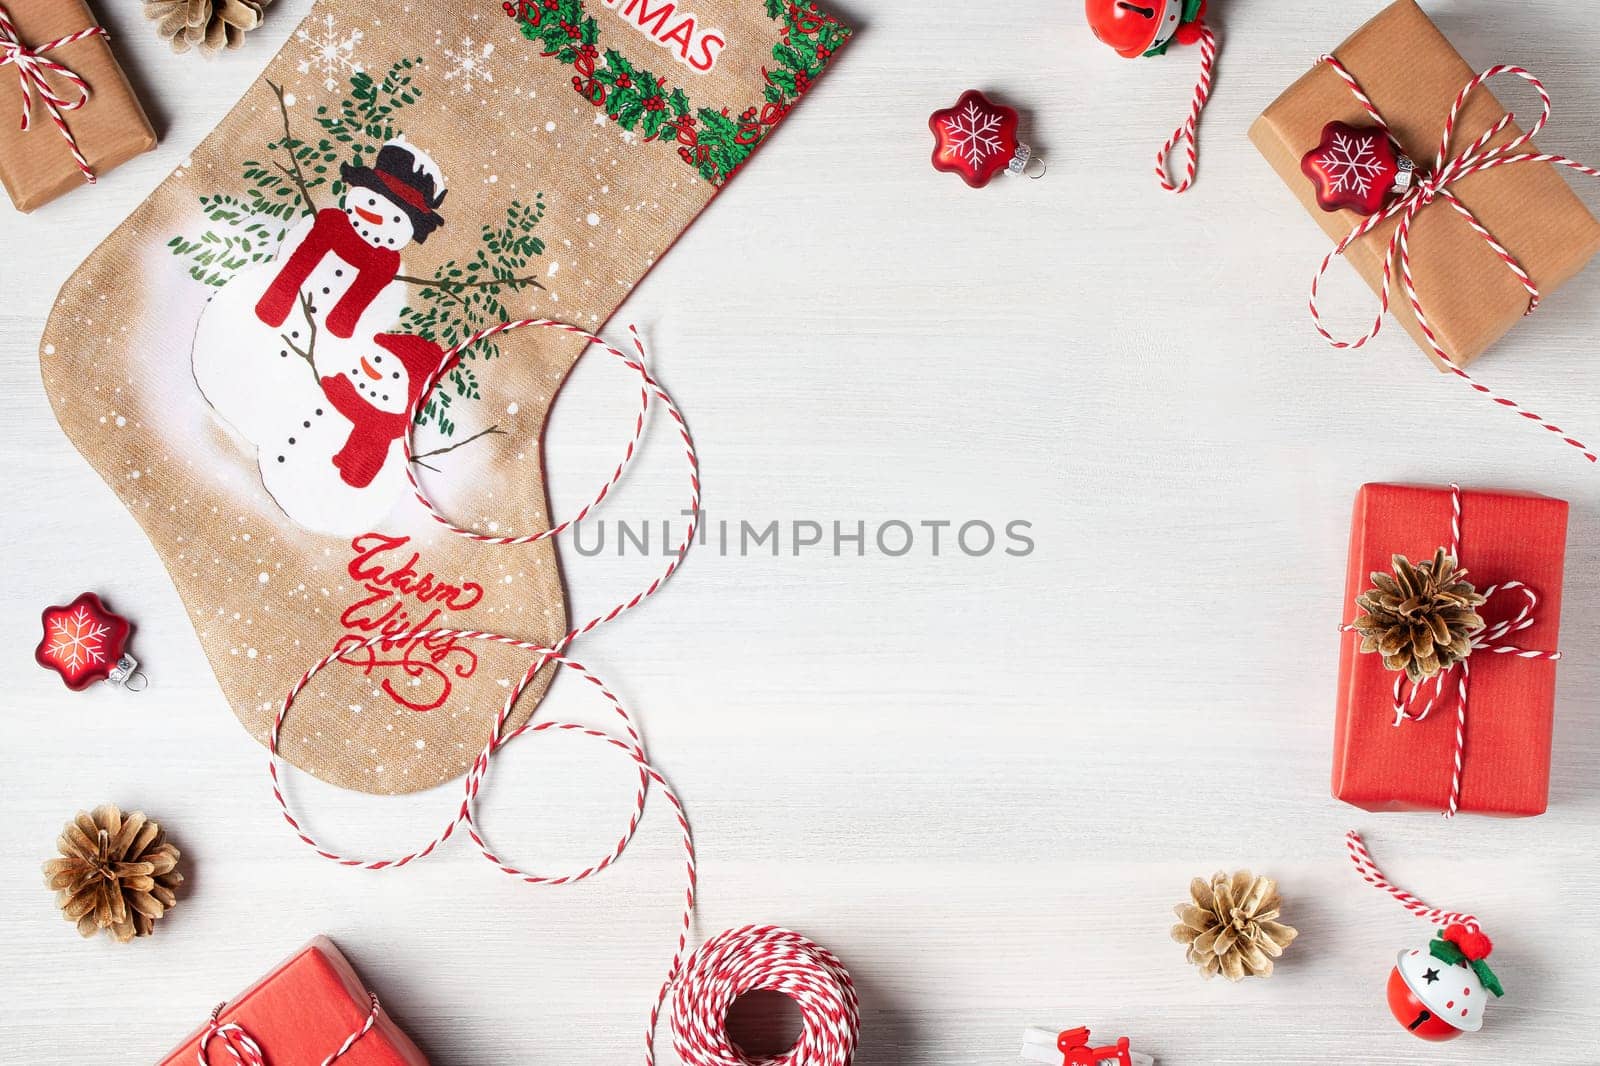 Preparing for Christmas - presents and decorations on a white wooden table. Mockup for advertisements and Christmas cards.